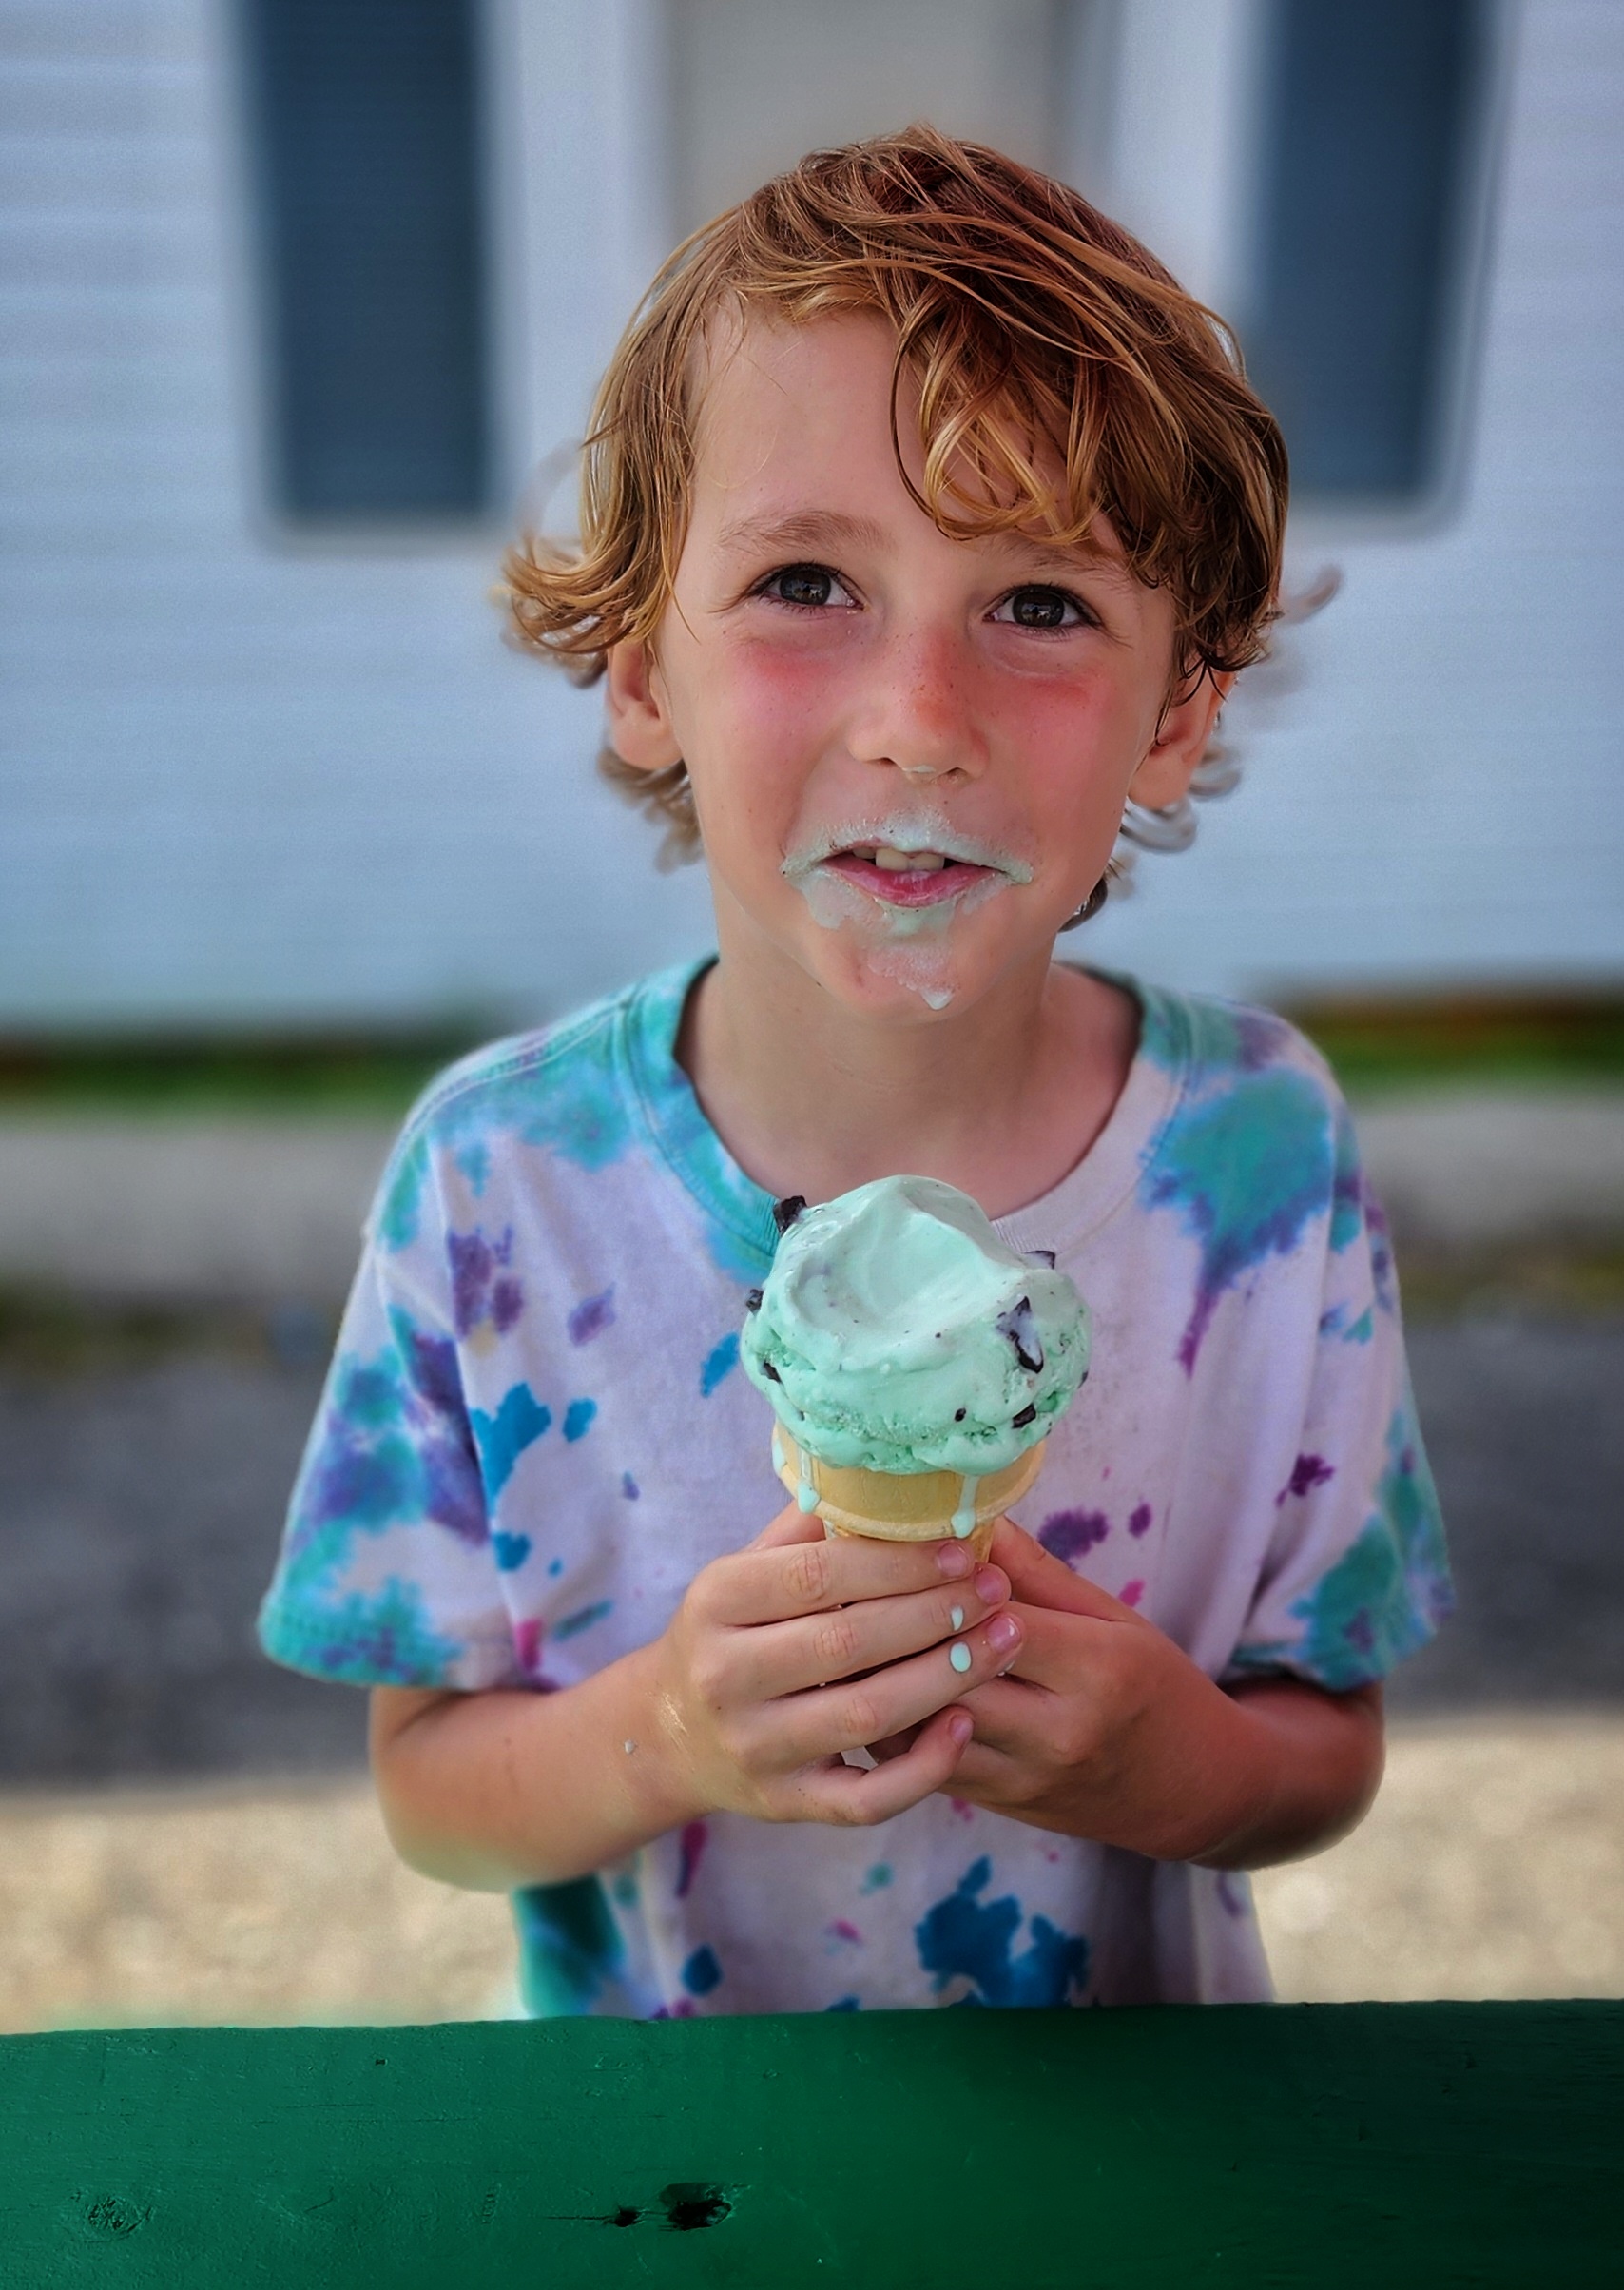 A color photo of a young white boy eating ice cream. He is looking at the camera and smiling with ice cream on his face. 